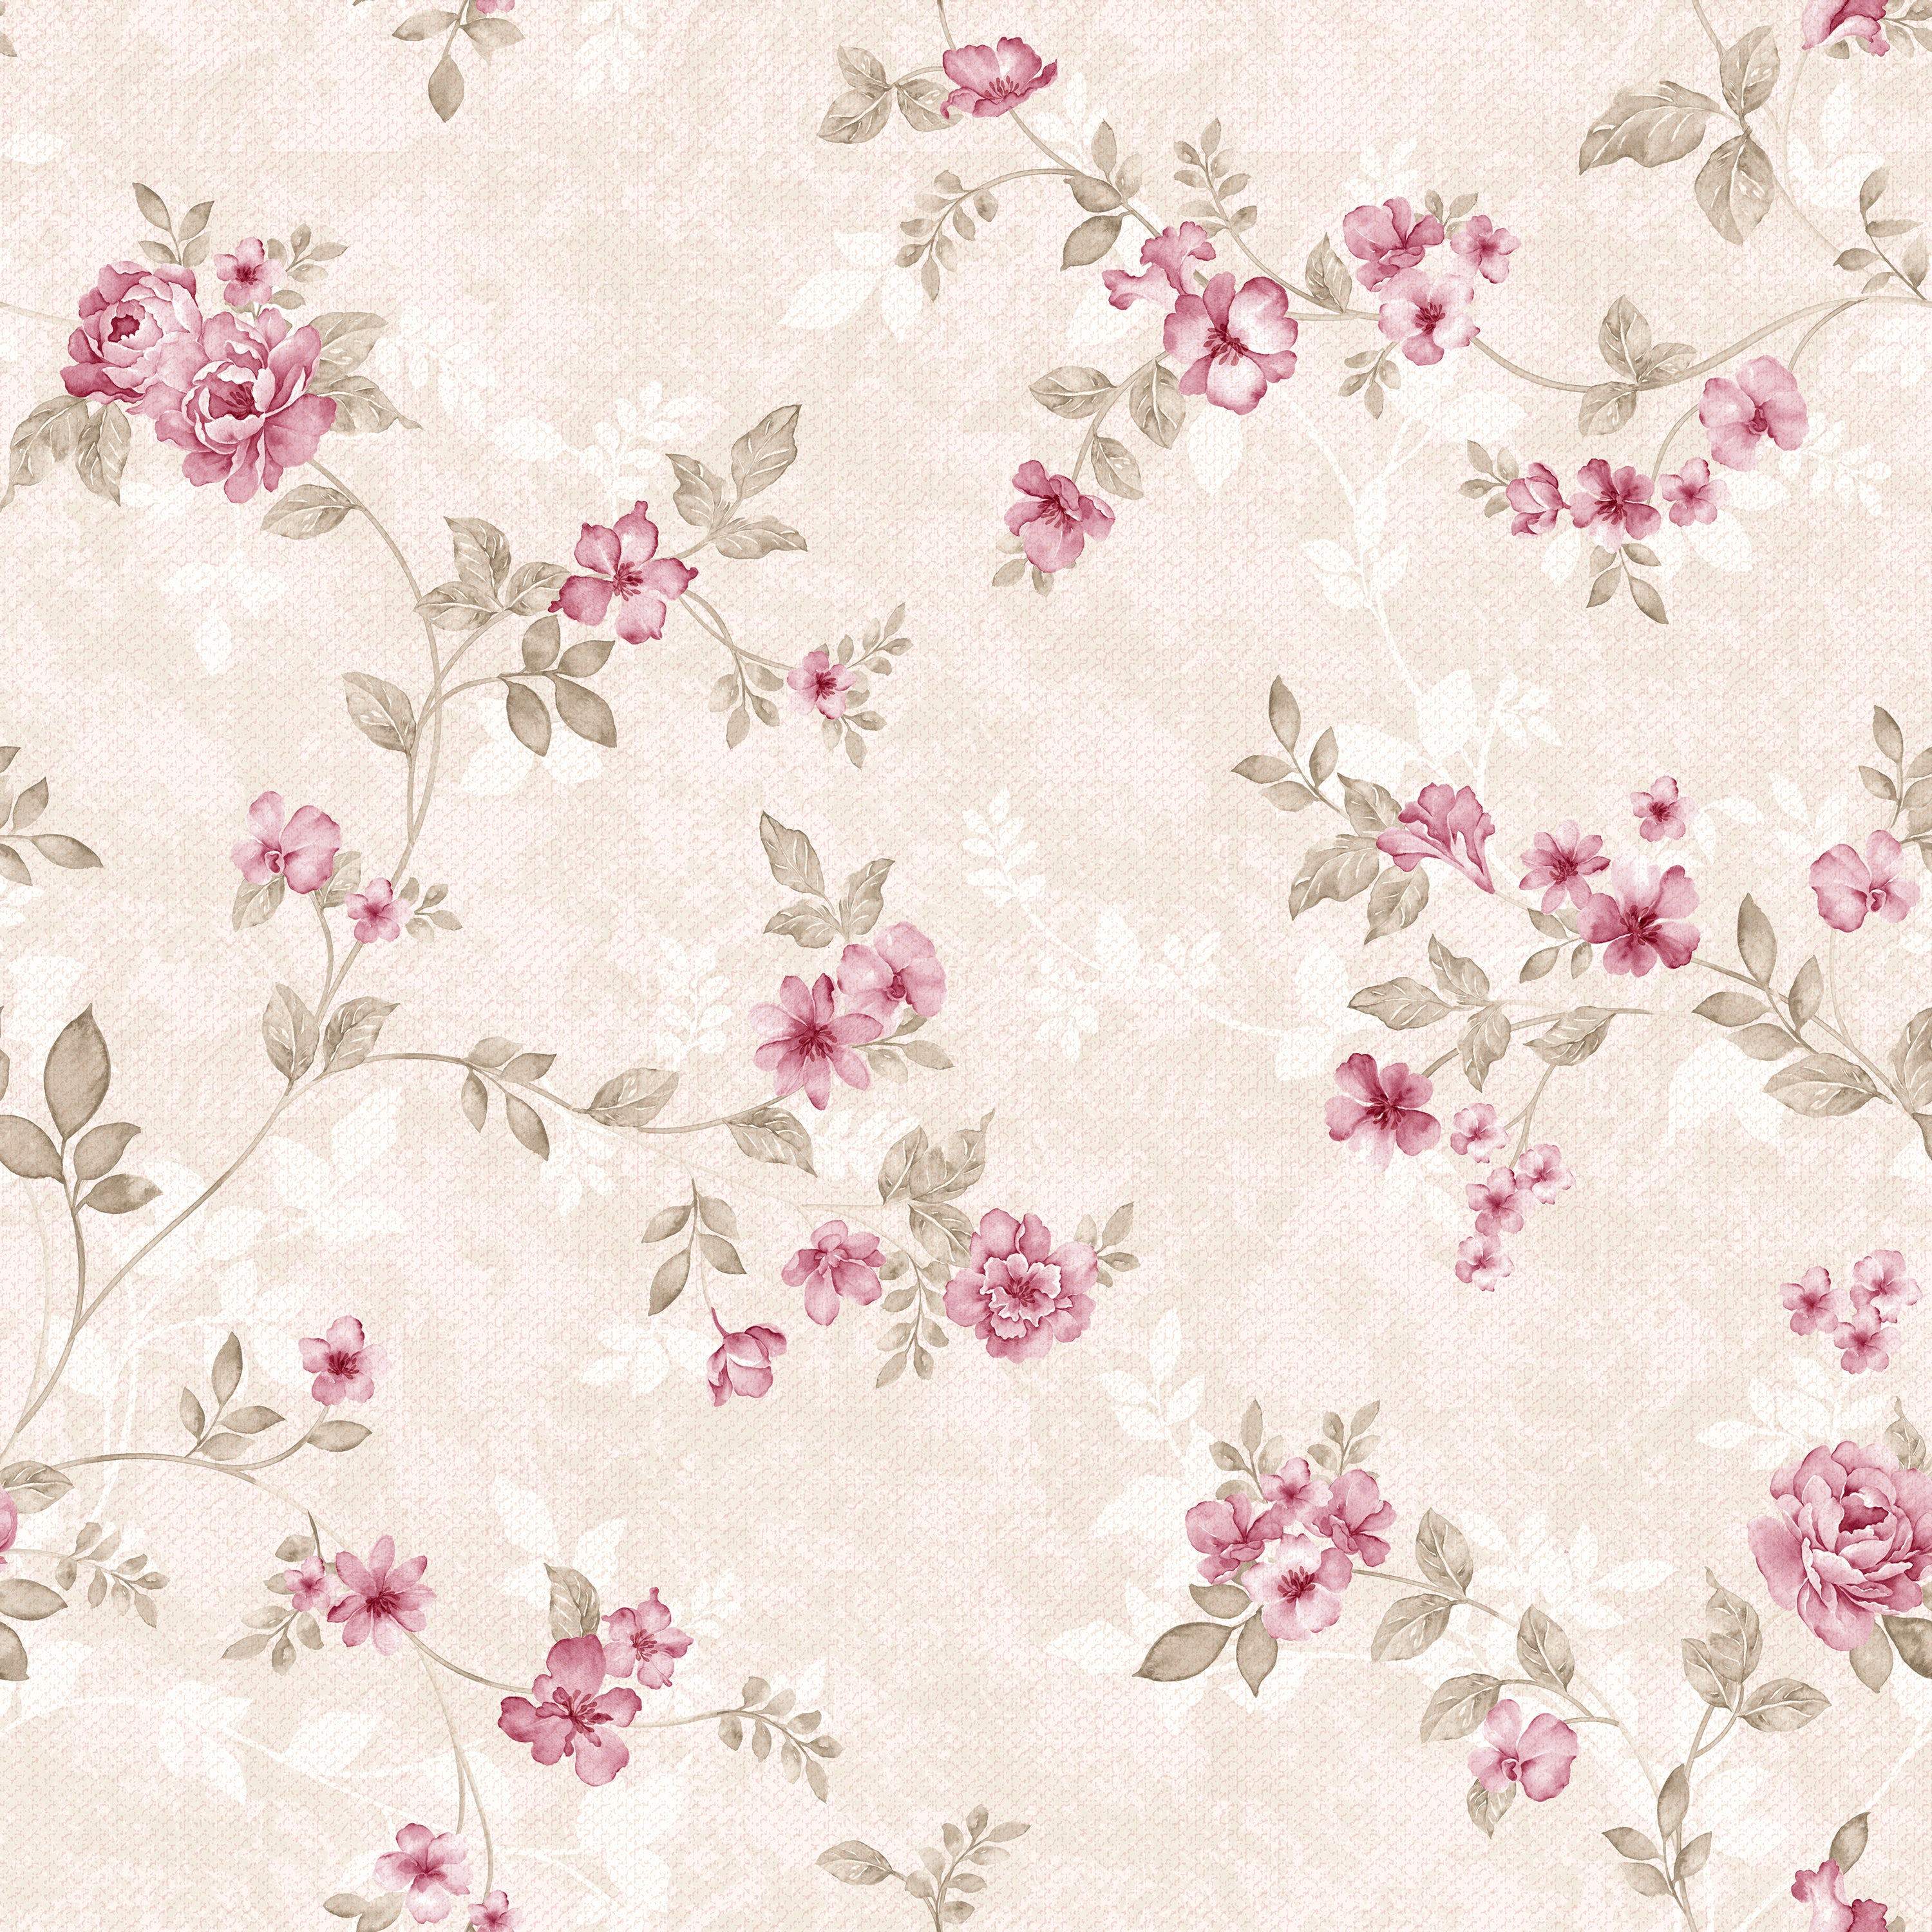 Close-up view of the Catrice Floral Wallpaper, illustrating its intricate pattern of blush pink flowers and dusky rose blooms connected by gentle green leaves, all set against a textured beige backdrop. This elegant design adds a soft, romantic touch to any interior space.